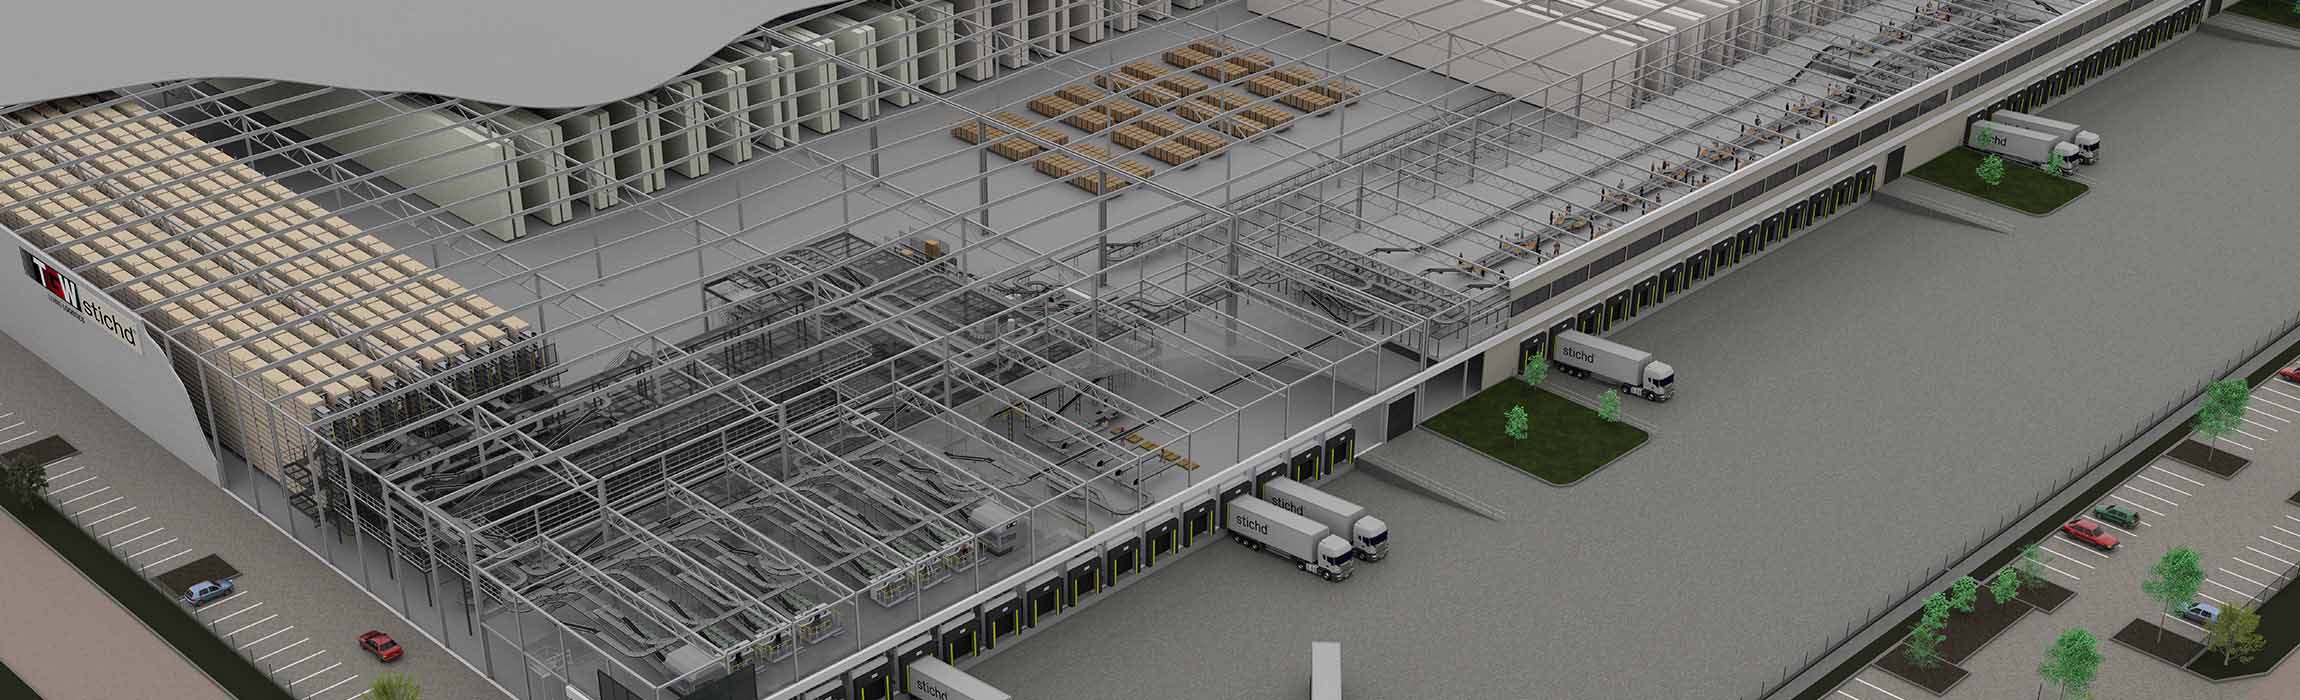 Highly automated fulfillment center by TGW for stichd.